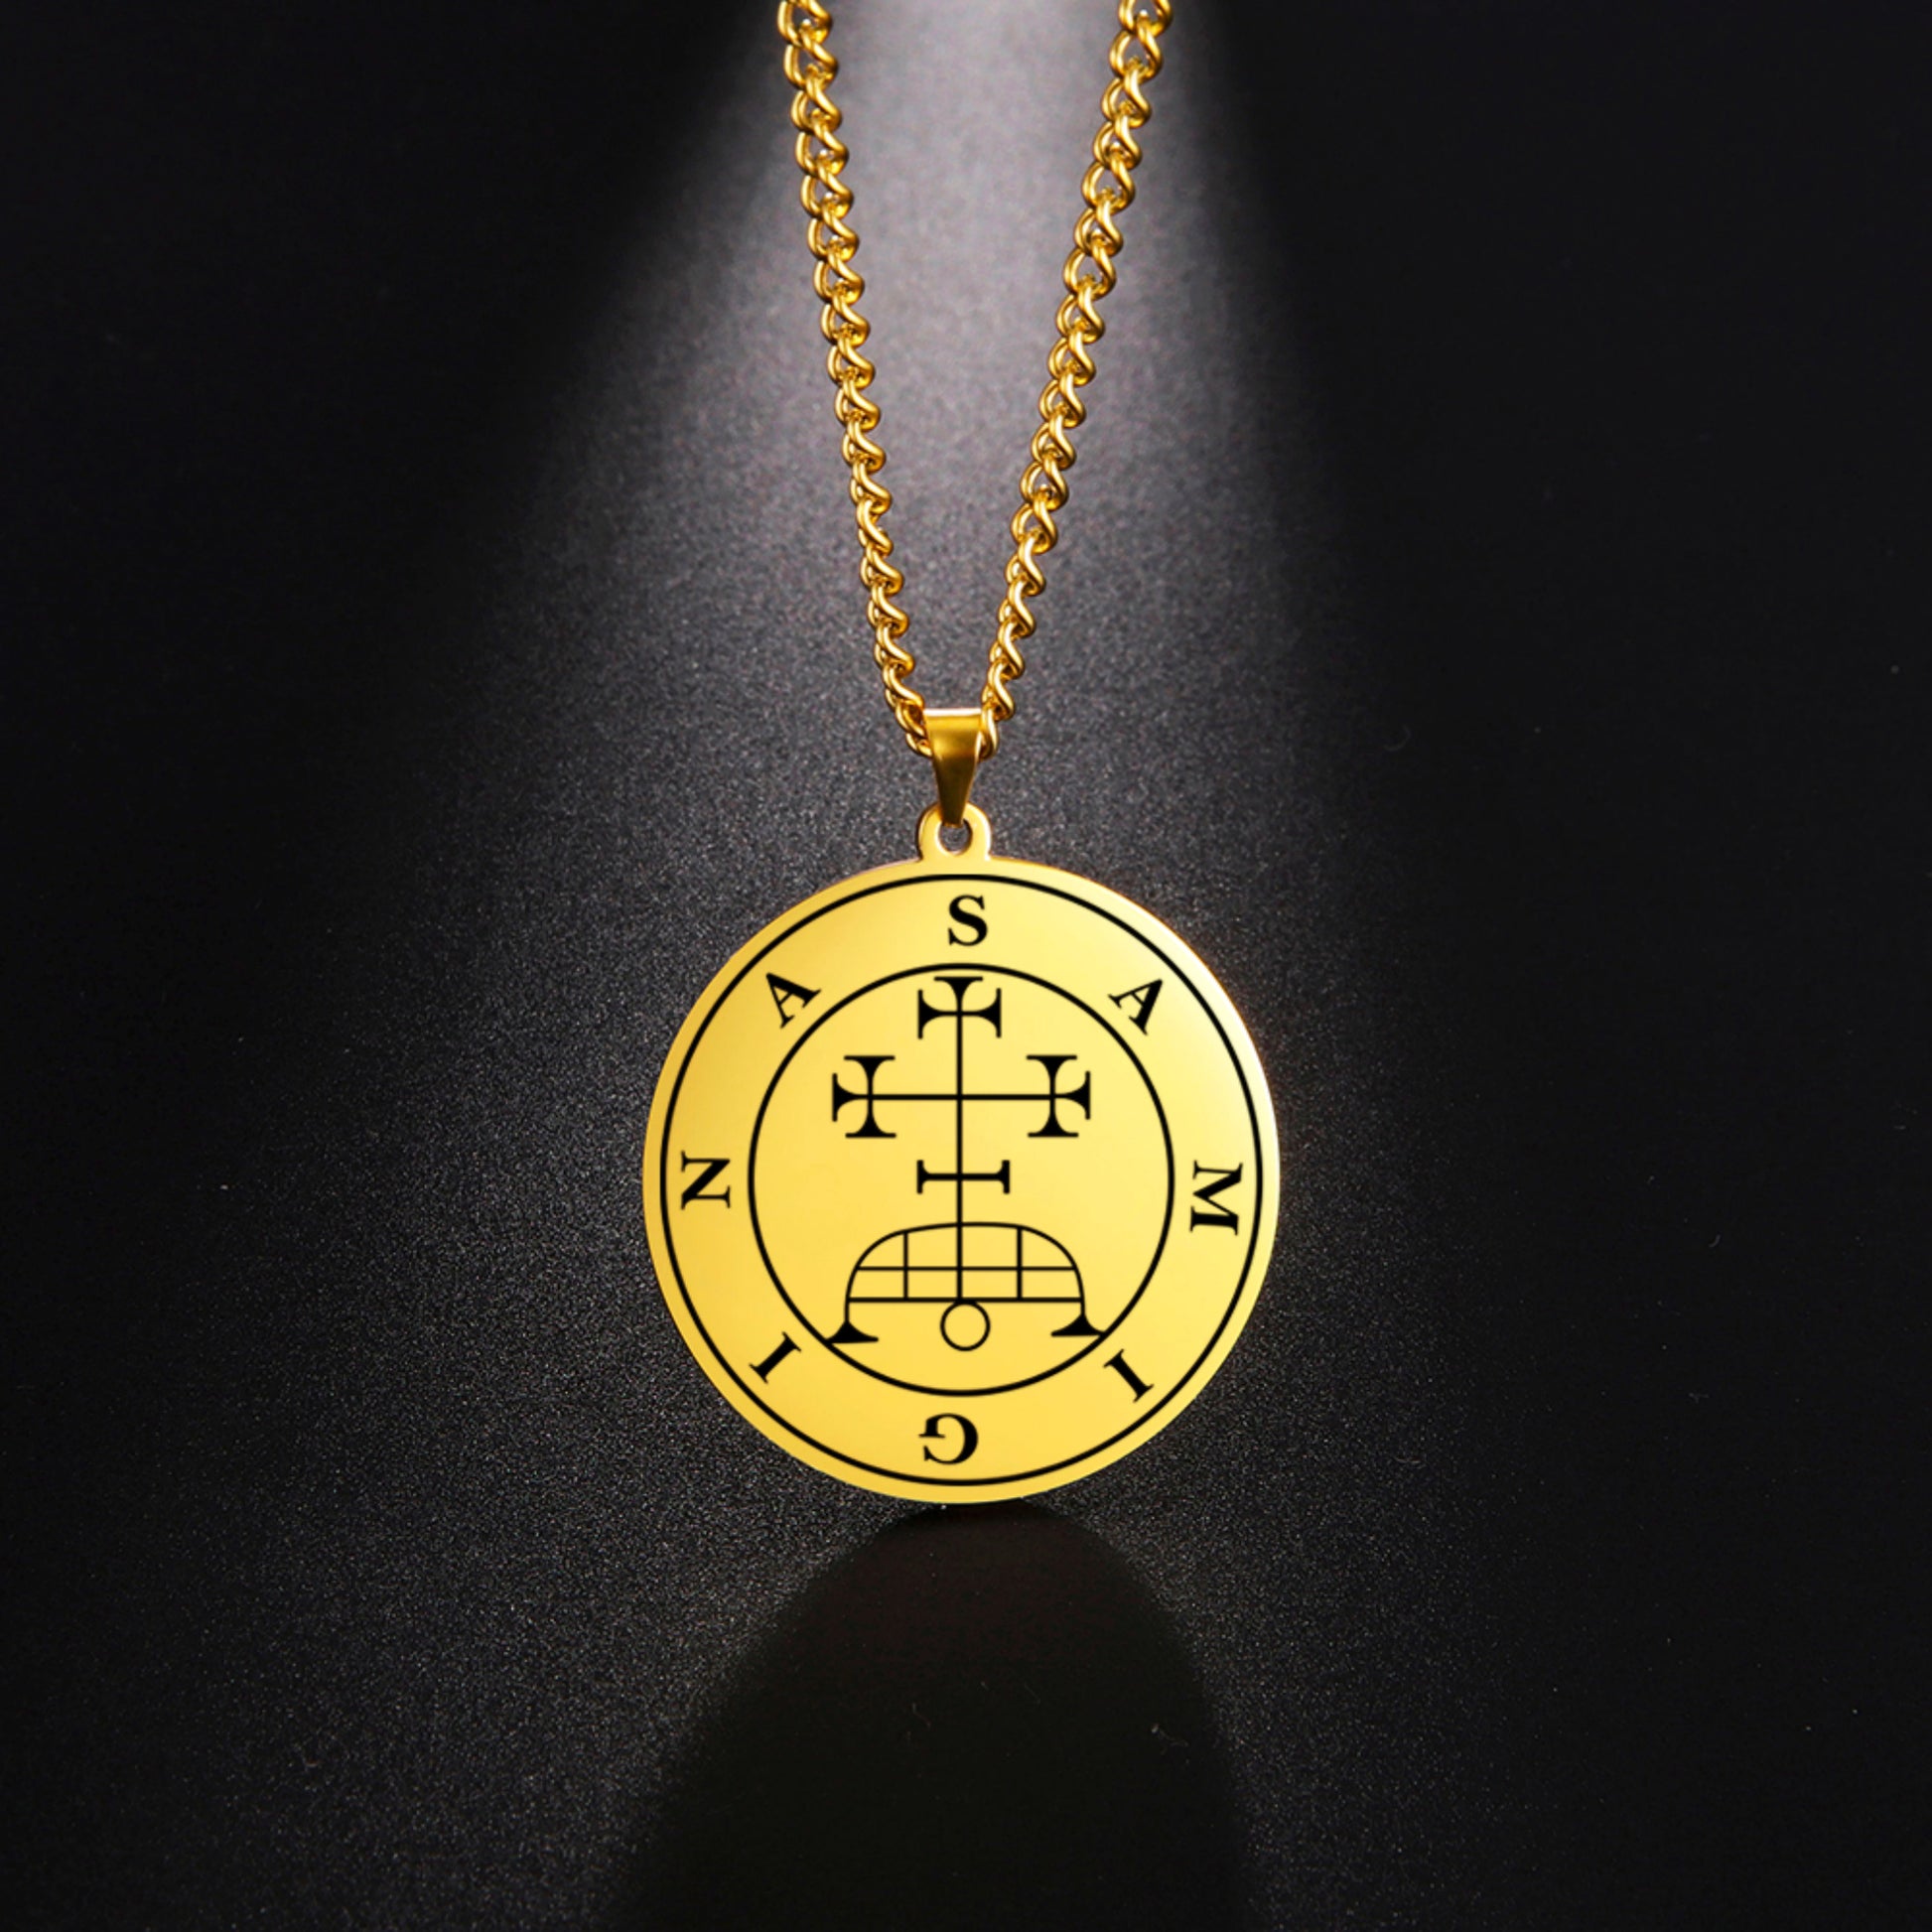 Gold Pendant Necklace With Seals Of The 72 Spirits In The Lesser Key of Solomon (Sigils 37-48) | Apollo Tarot Jewelry Shop